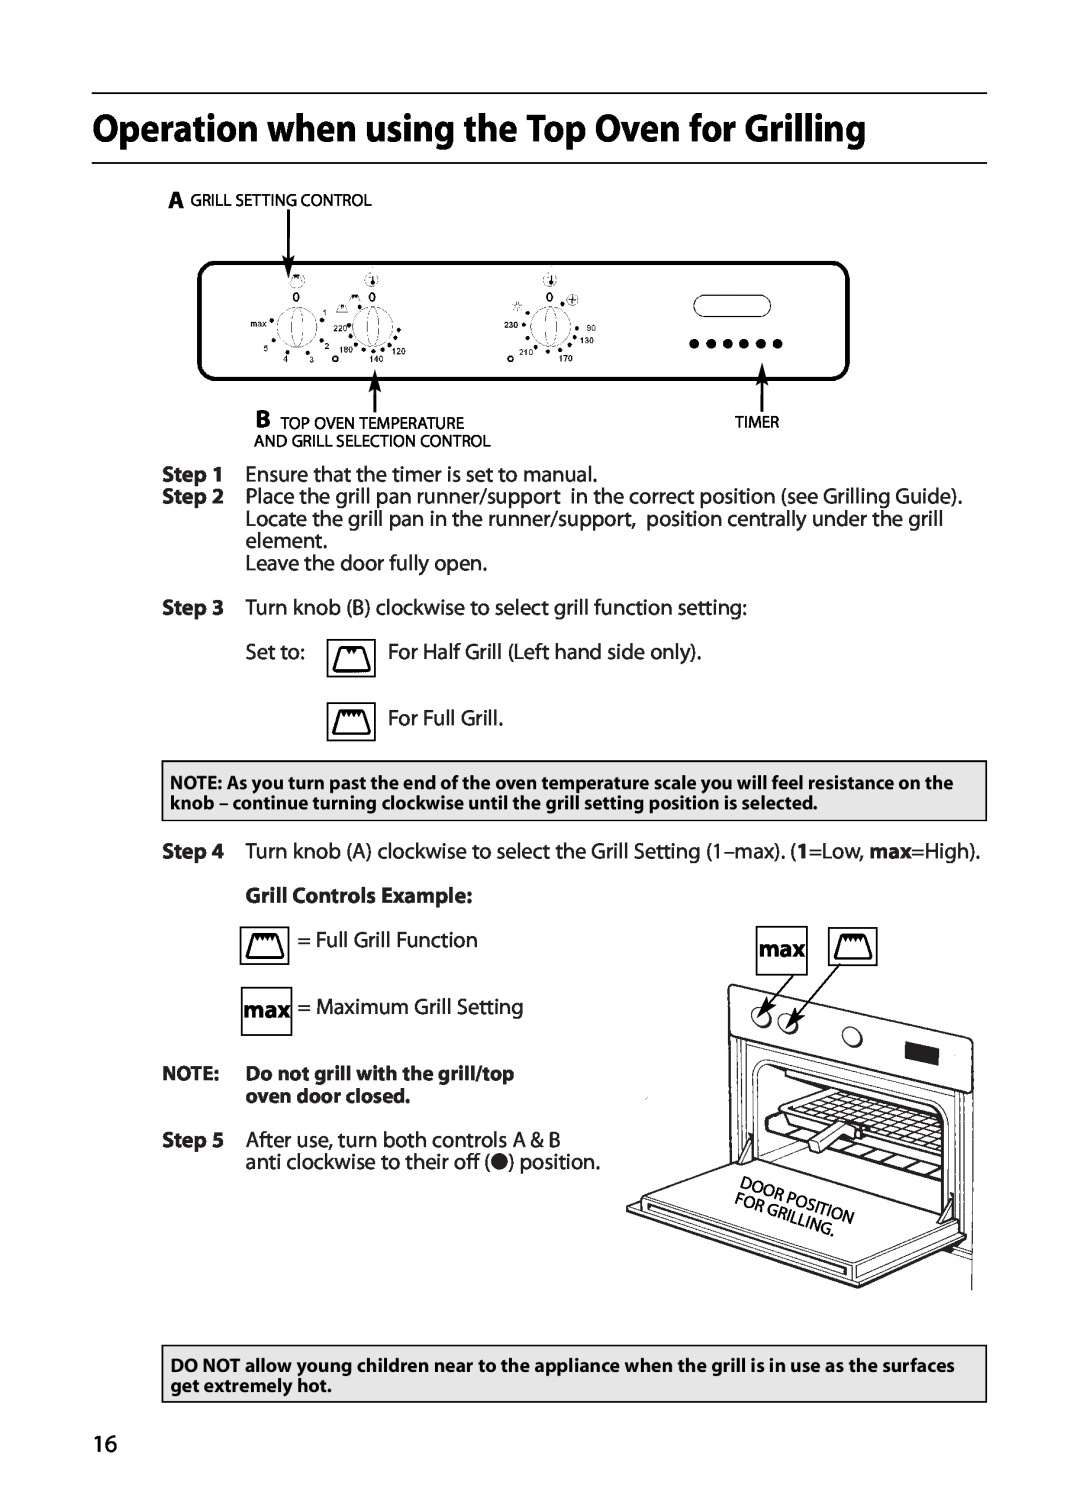 Indesit FDE20 manual Operation when using the Top Oven for Grilling, Grill Controls Example 